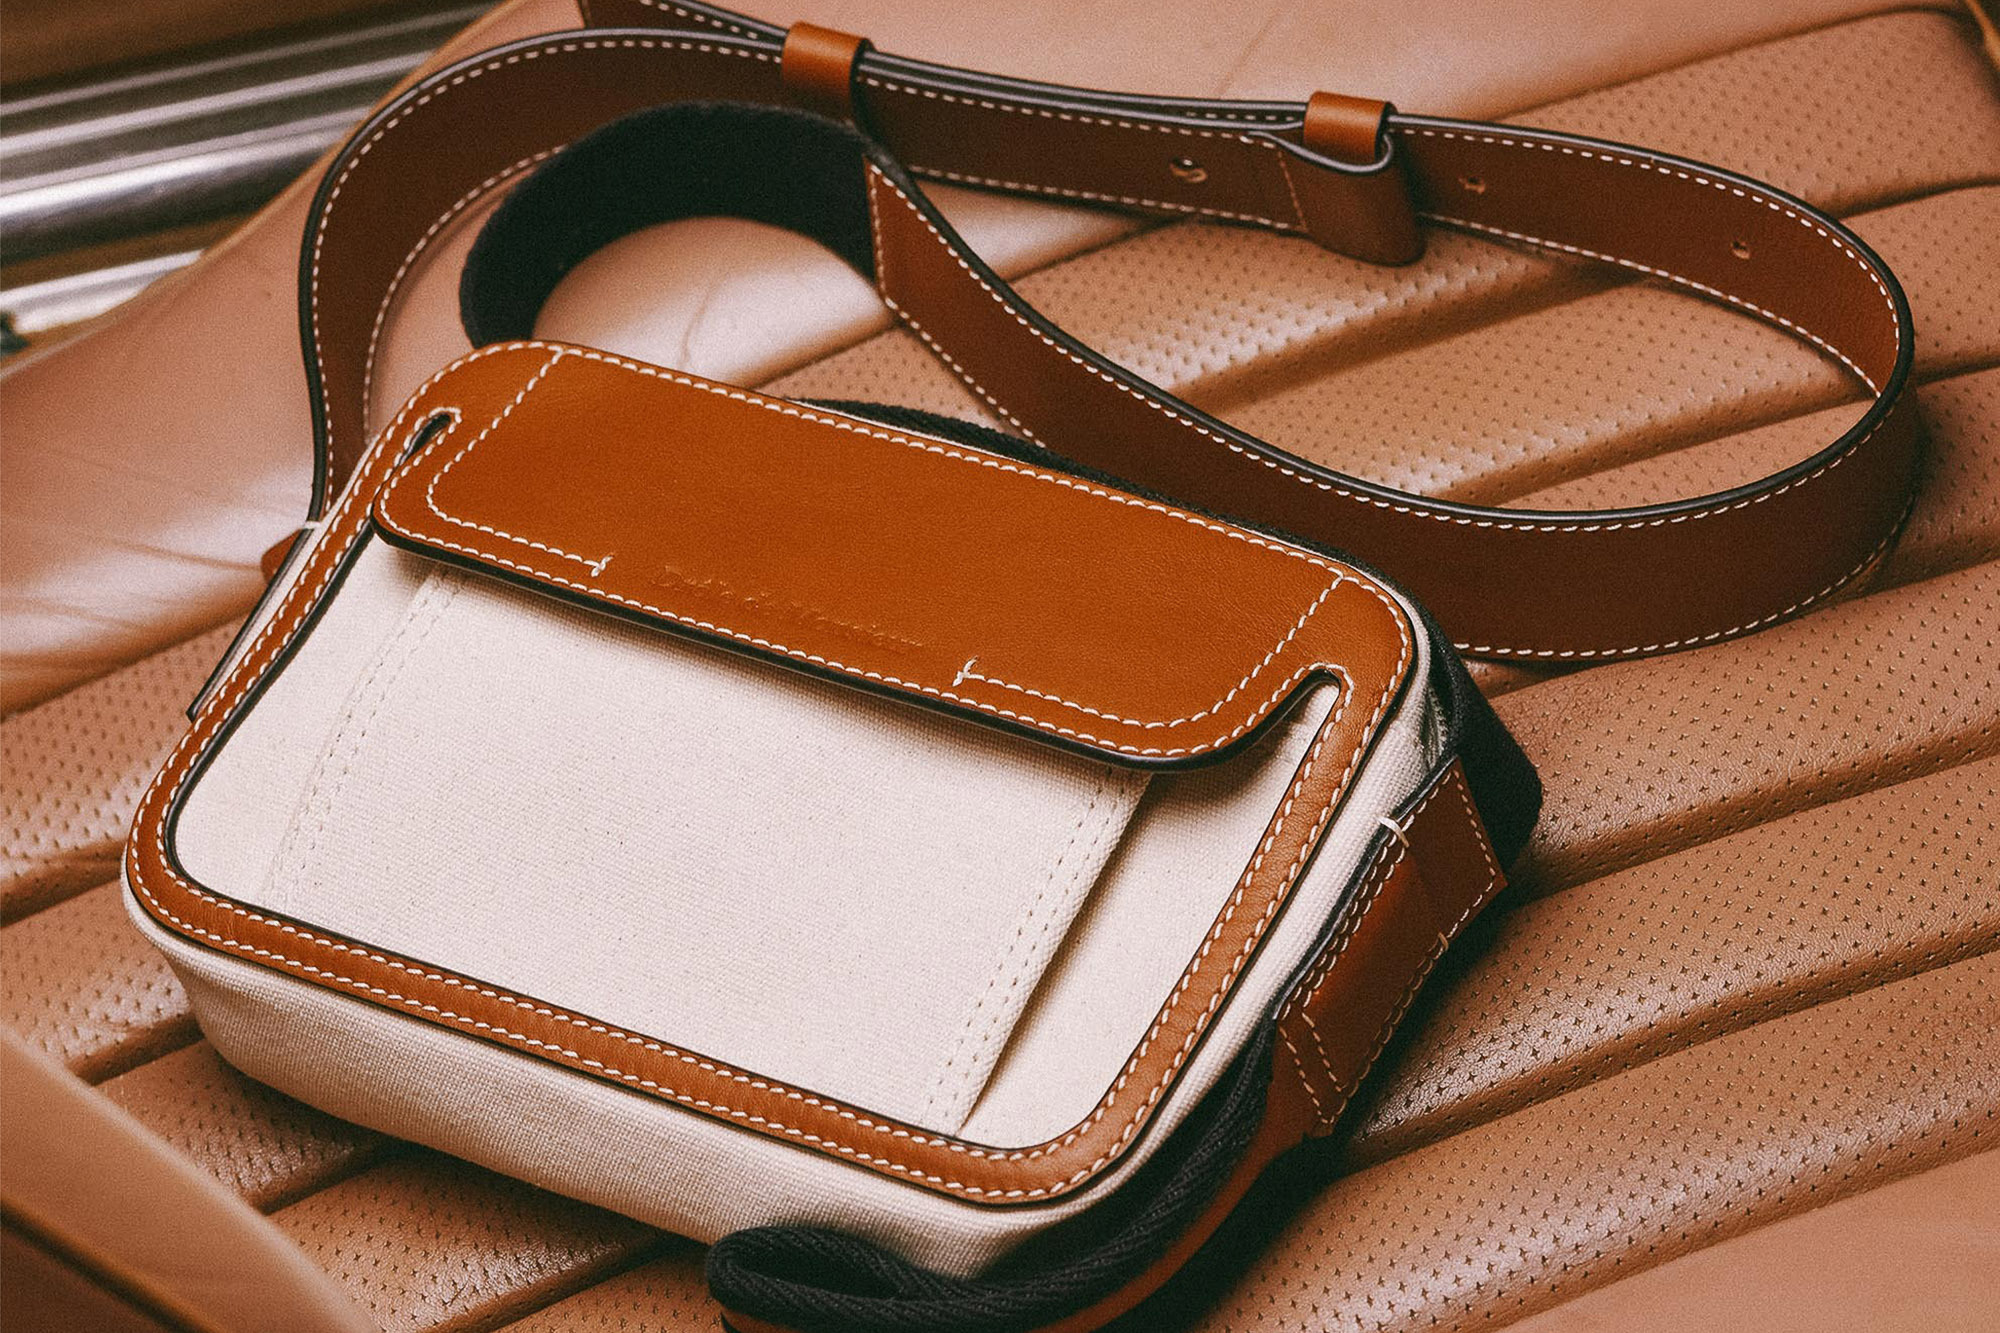 Bags and Leather Goods - focus